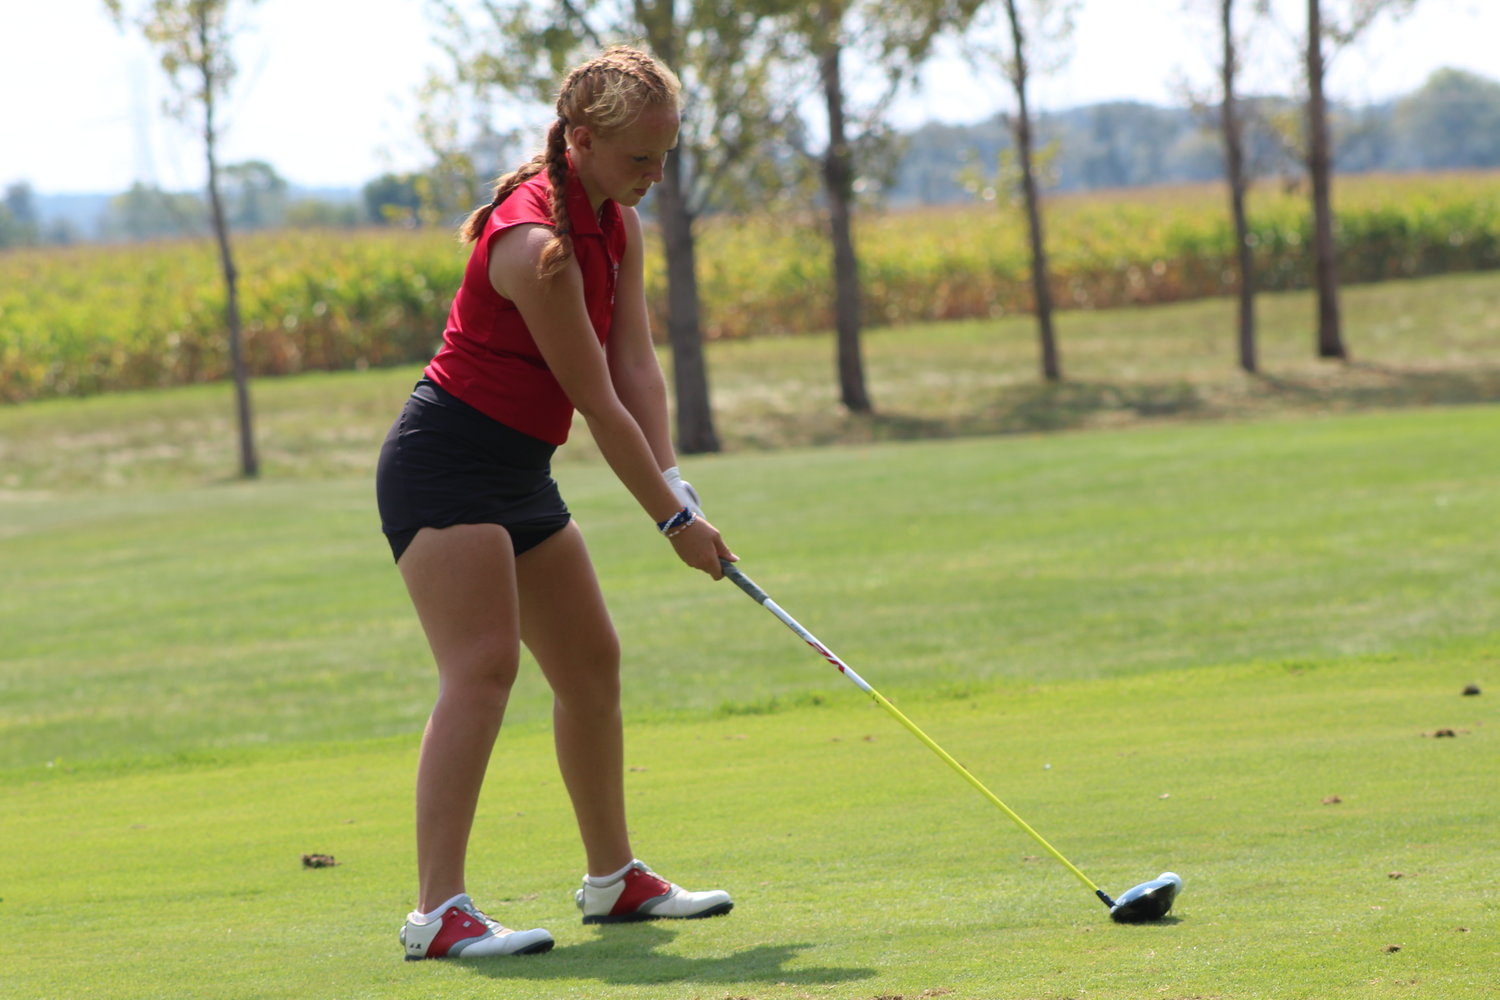 Southmont’s Addison Meadows earned medalist at the Attica sectional with a 79. The sophomore will compete at Saturday’s Regional at Battle Ground Country Club in West Lafayette as she eyes another state finals appearance.